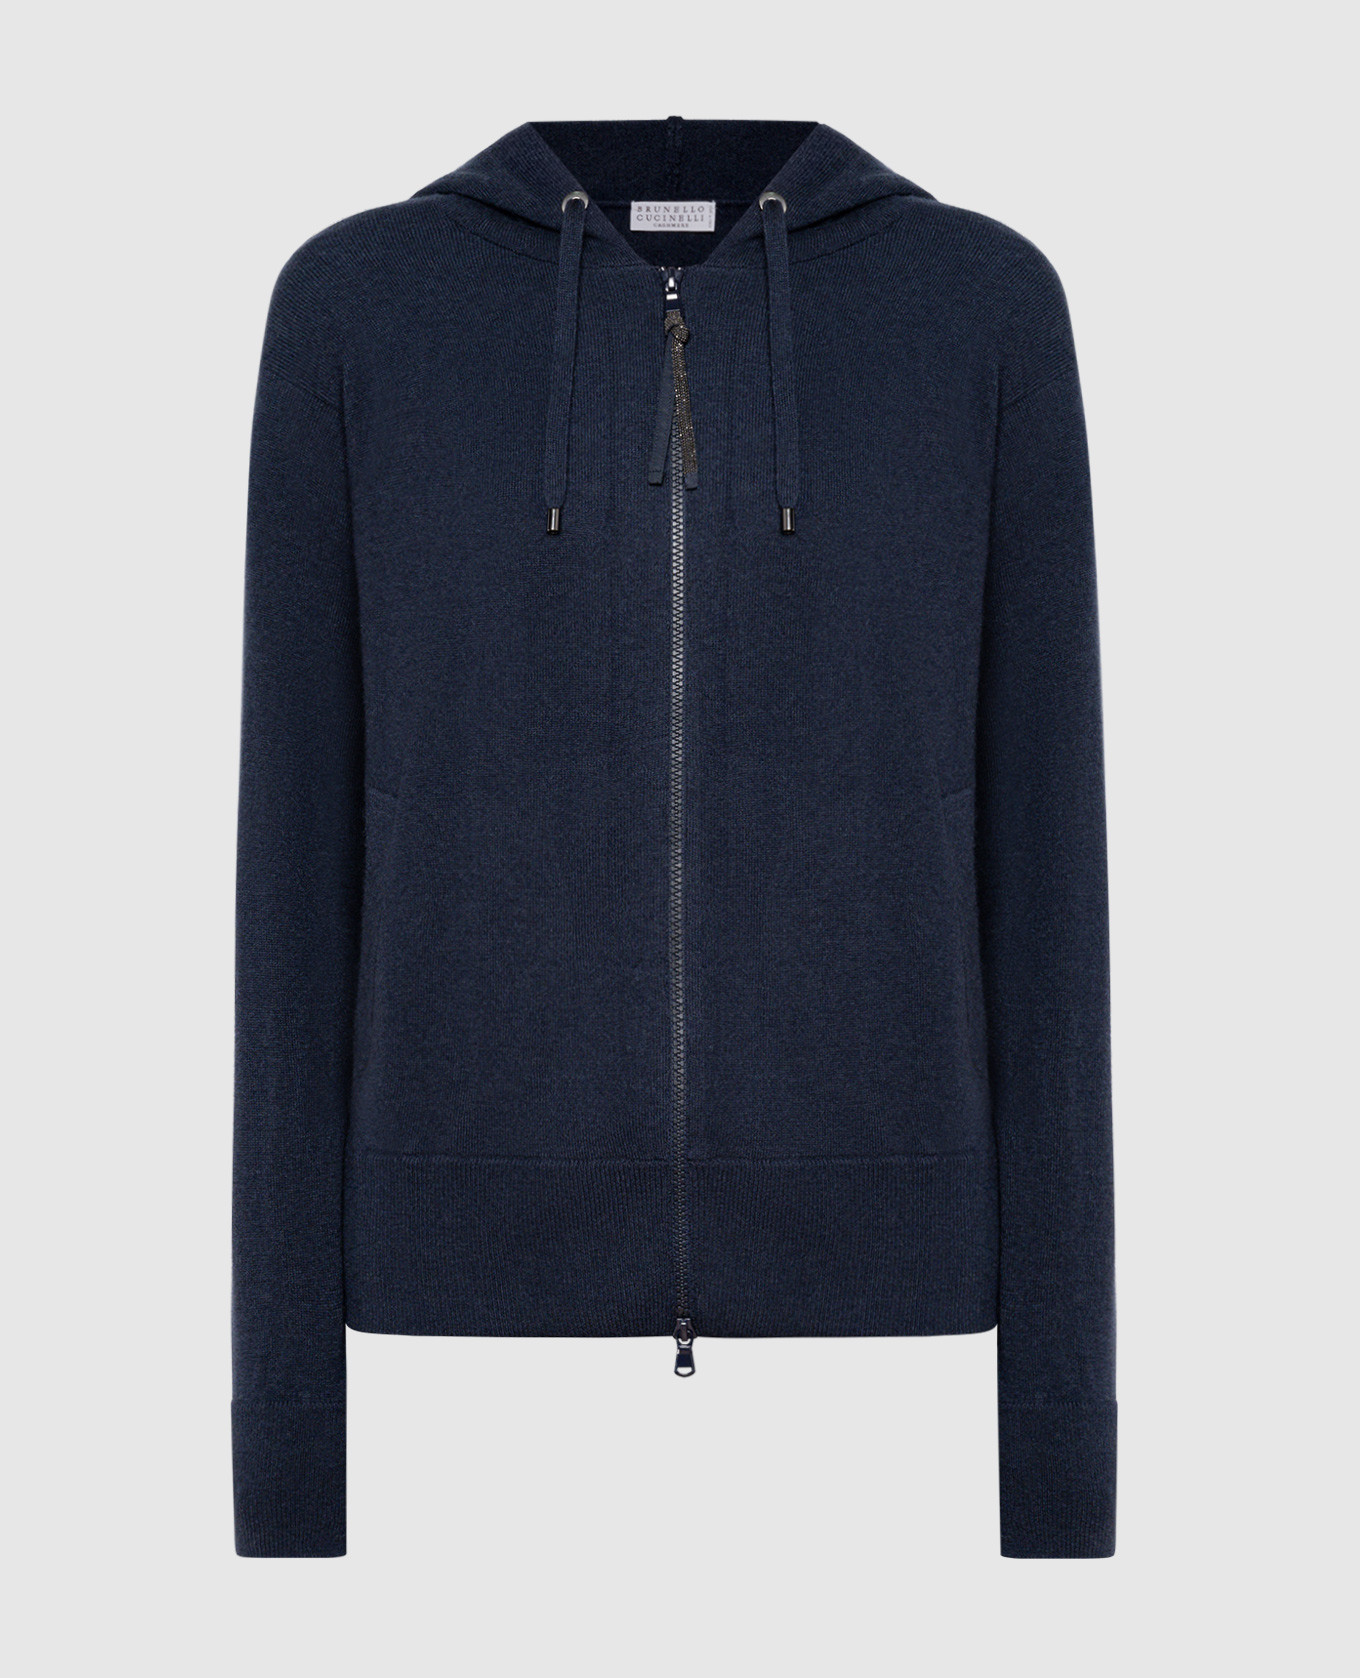 Blue cashmere sports jacket with monil chain